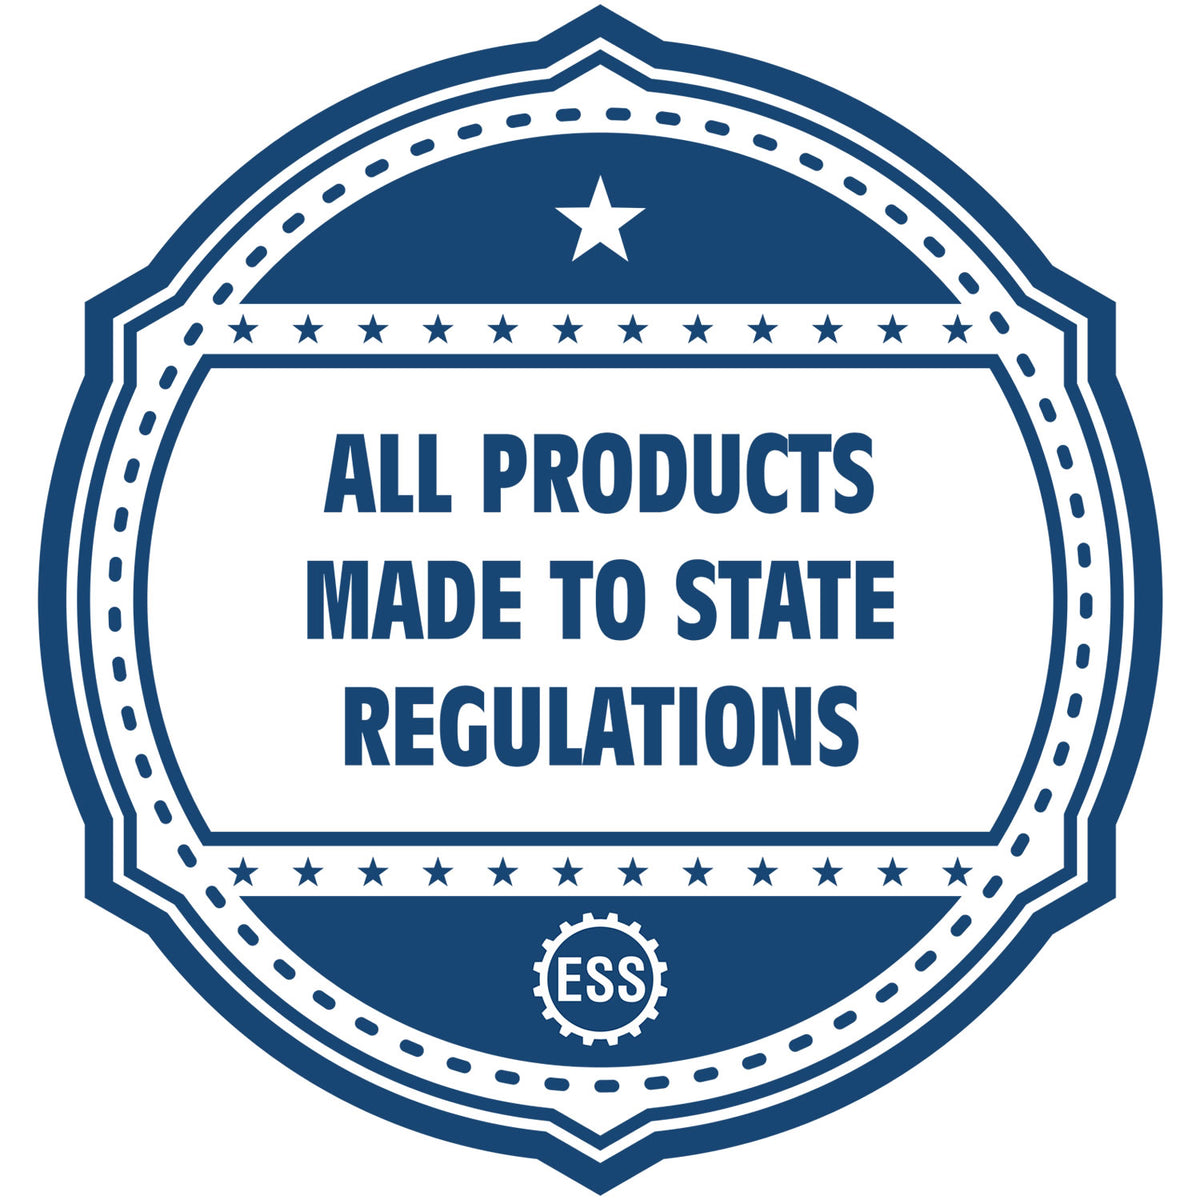 A blue icon or badge for the Self-Inking Wisconsin Geologist Stamp showing that this product is made in compliance with state regulations.